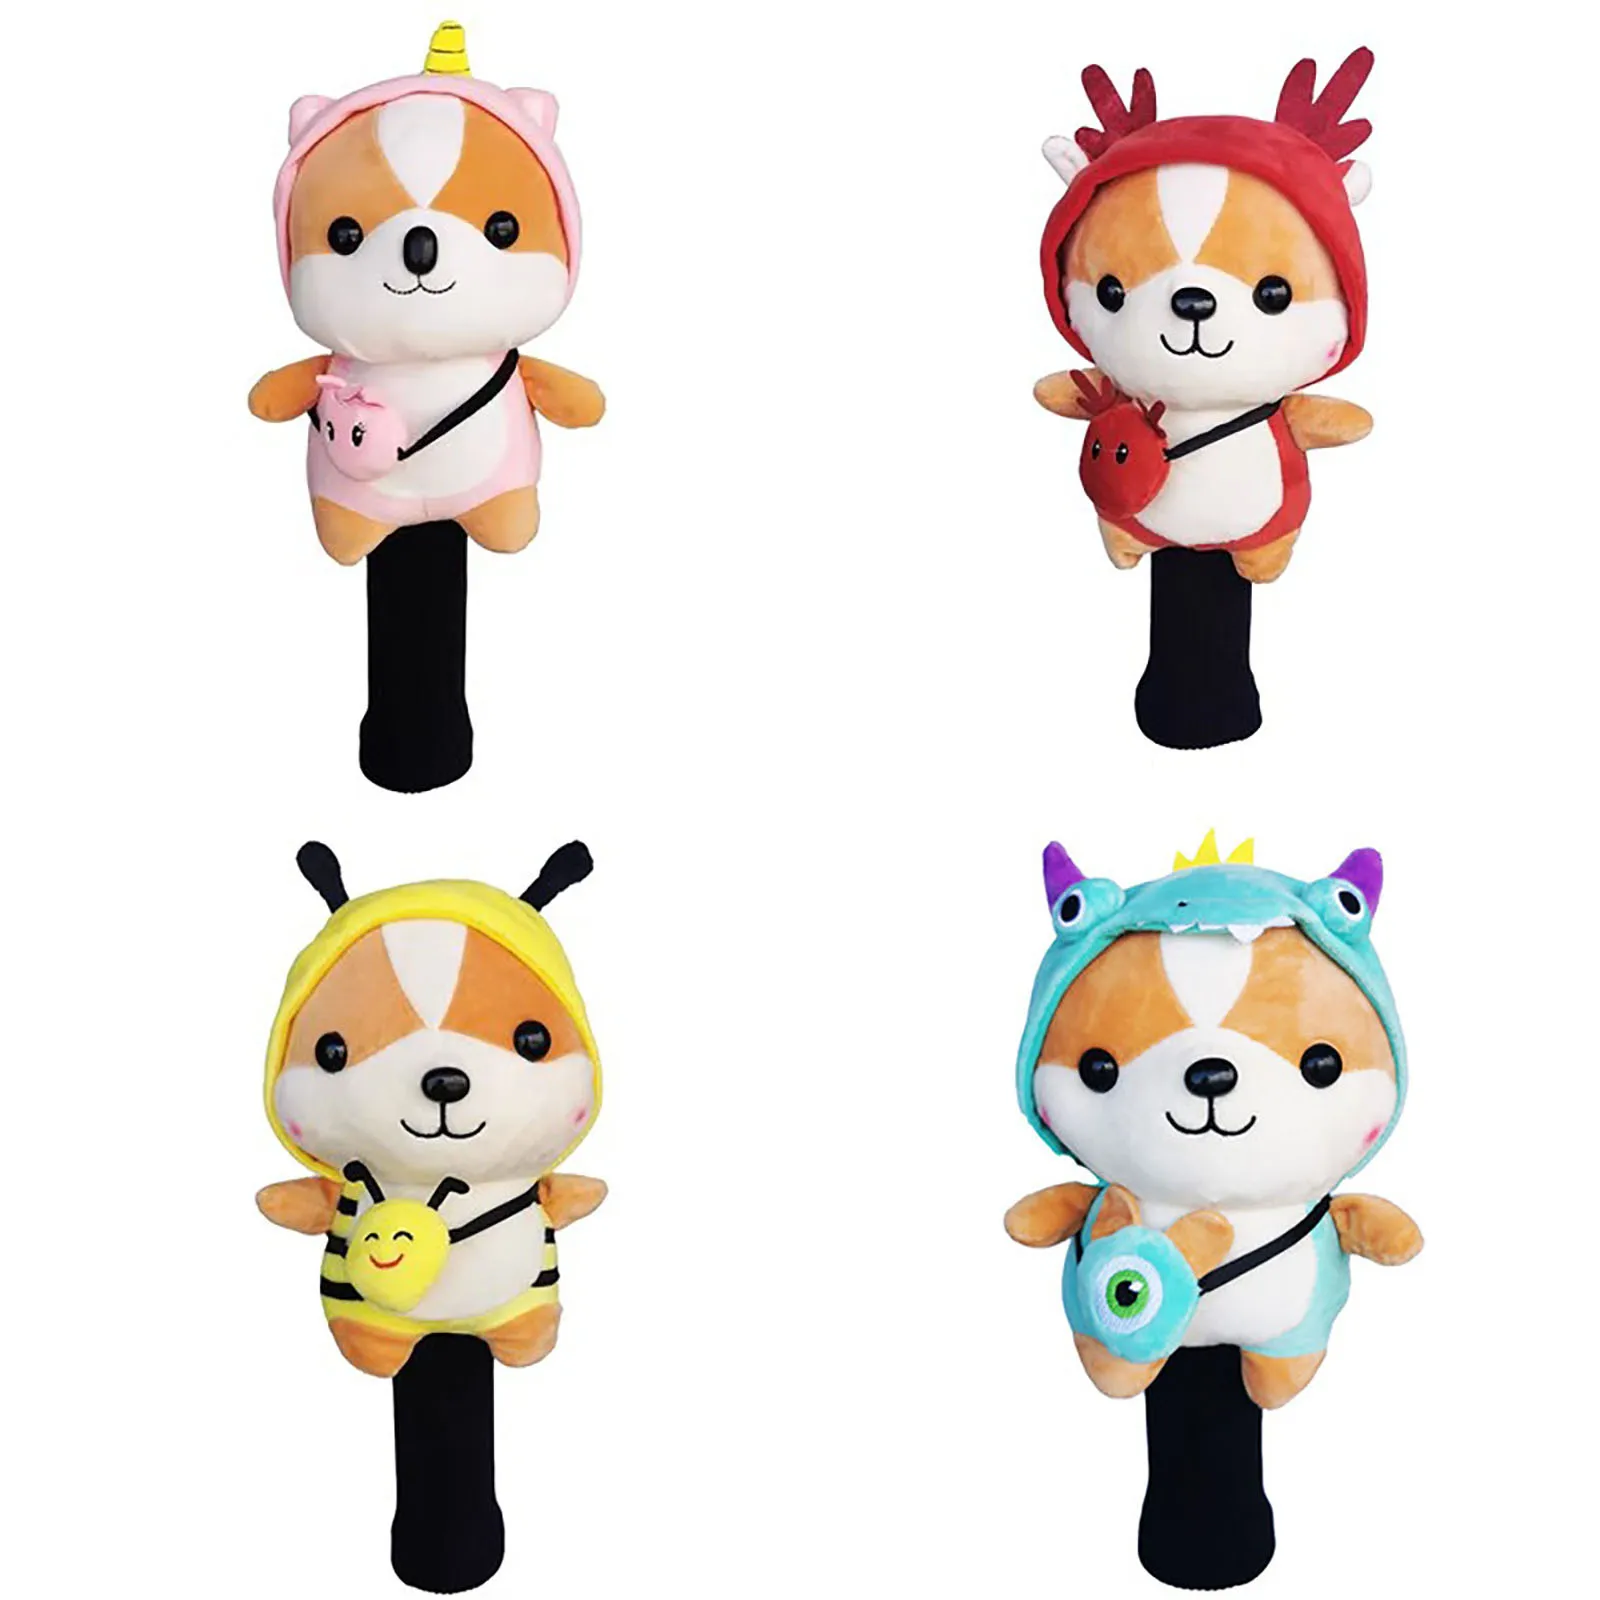 

Animal Golf Wood Head Covers Golf Driver Fairway Hybrid Headcover Plush Protecter Mascot Novelty Cute Gift